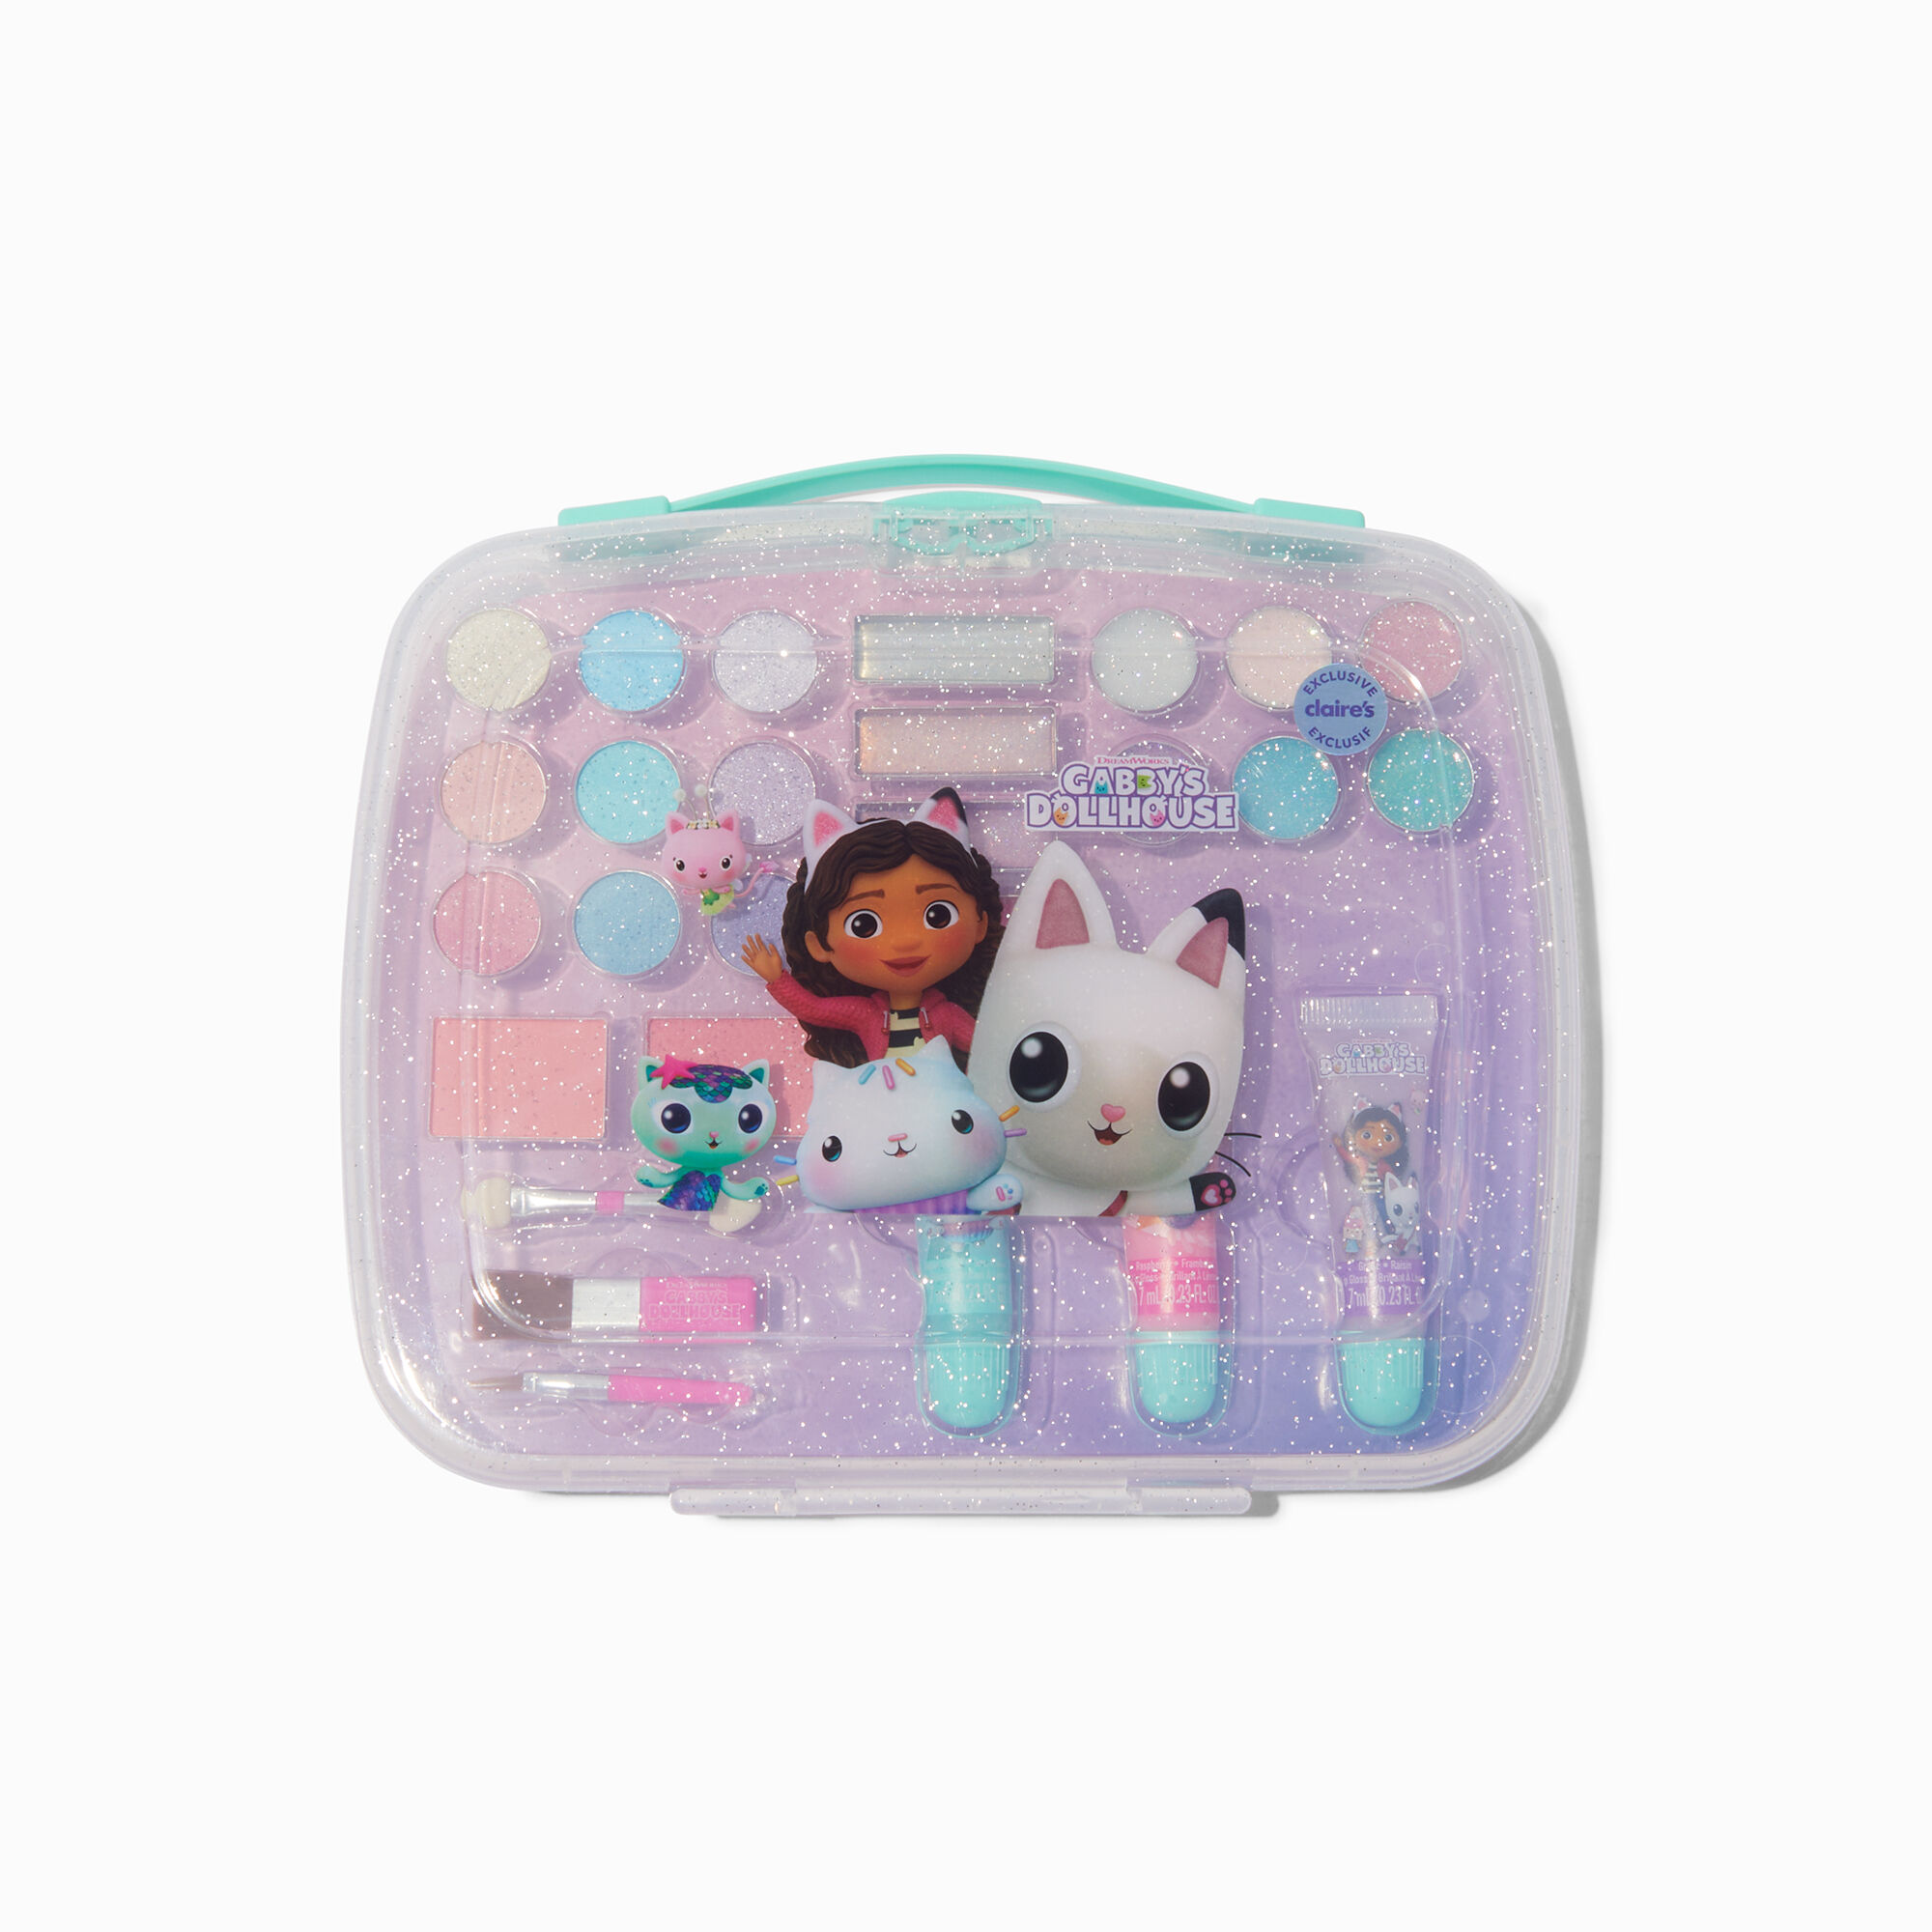 View Gabbys Dollhouse Claires Exclusive Glitter Makeup Case information